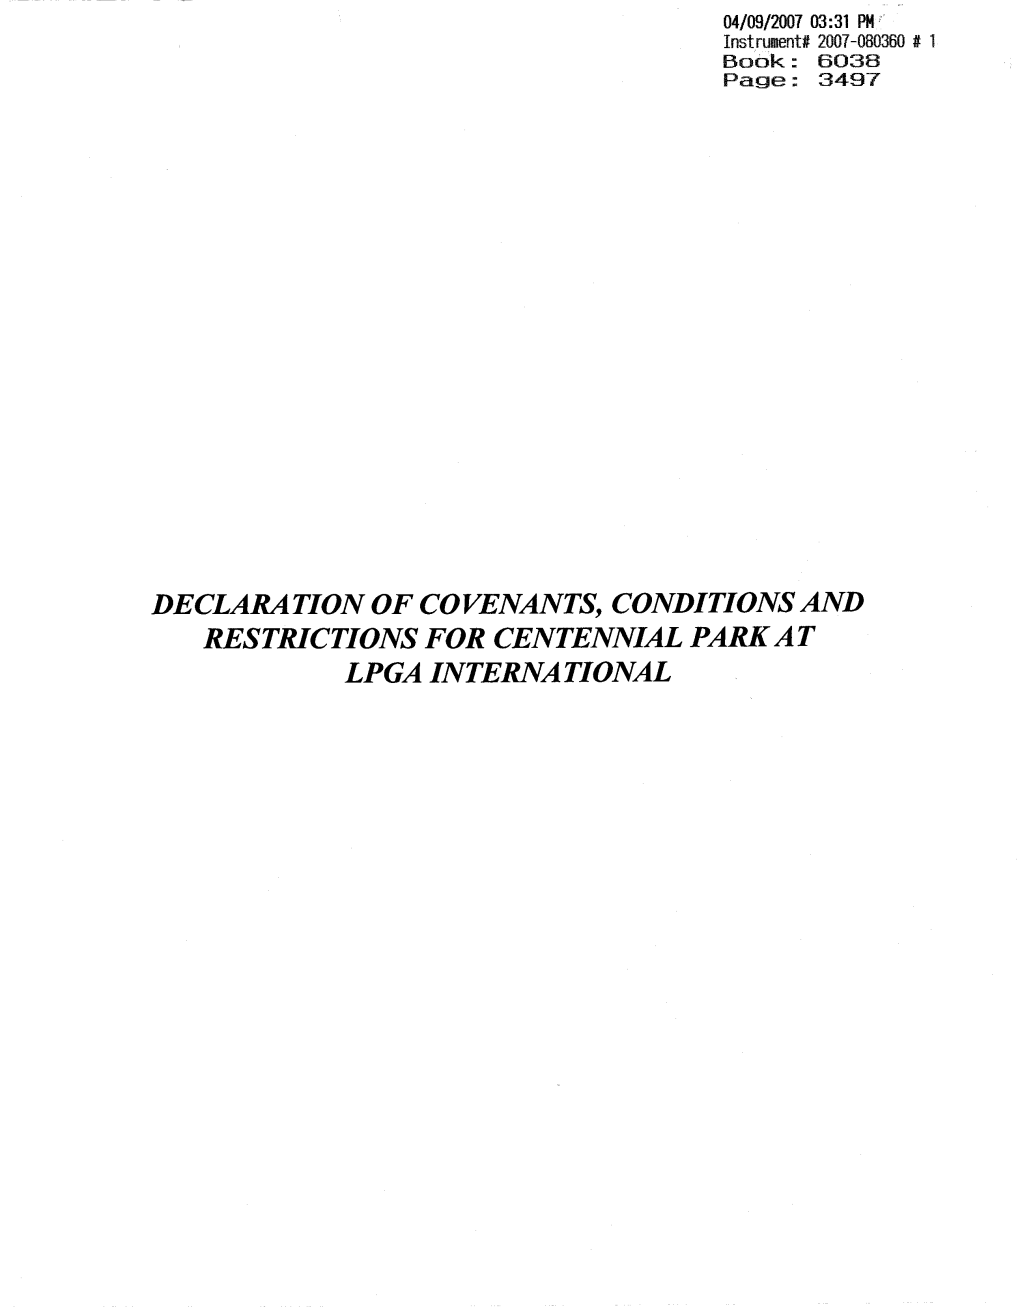 DECLARATION of COVENANTS, CONDITIONS and RESTRICTIONS for CENTENNIAL PARK at LPGA INTERNATIONAL Instrument# 2007-080360 # 2 Book: 6038 Page: 3498